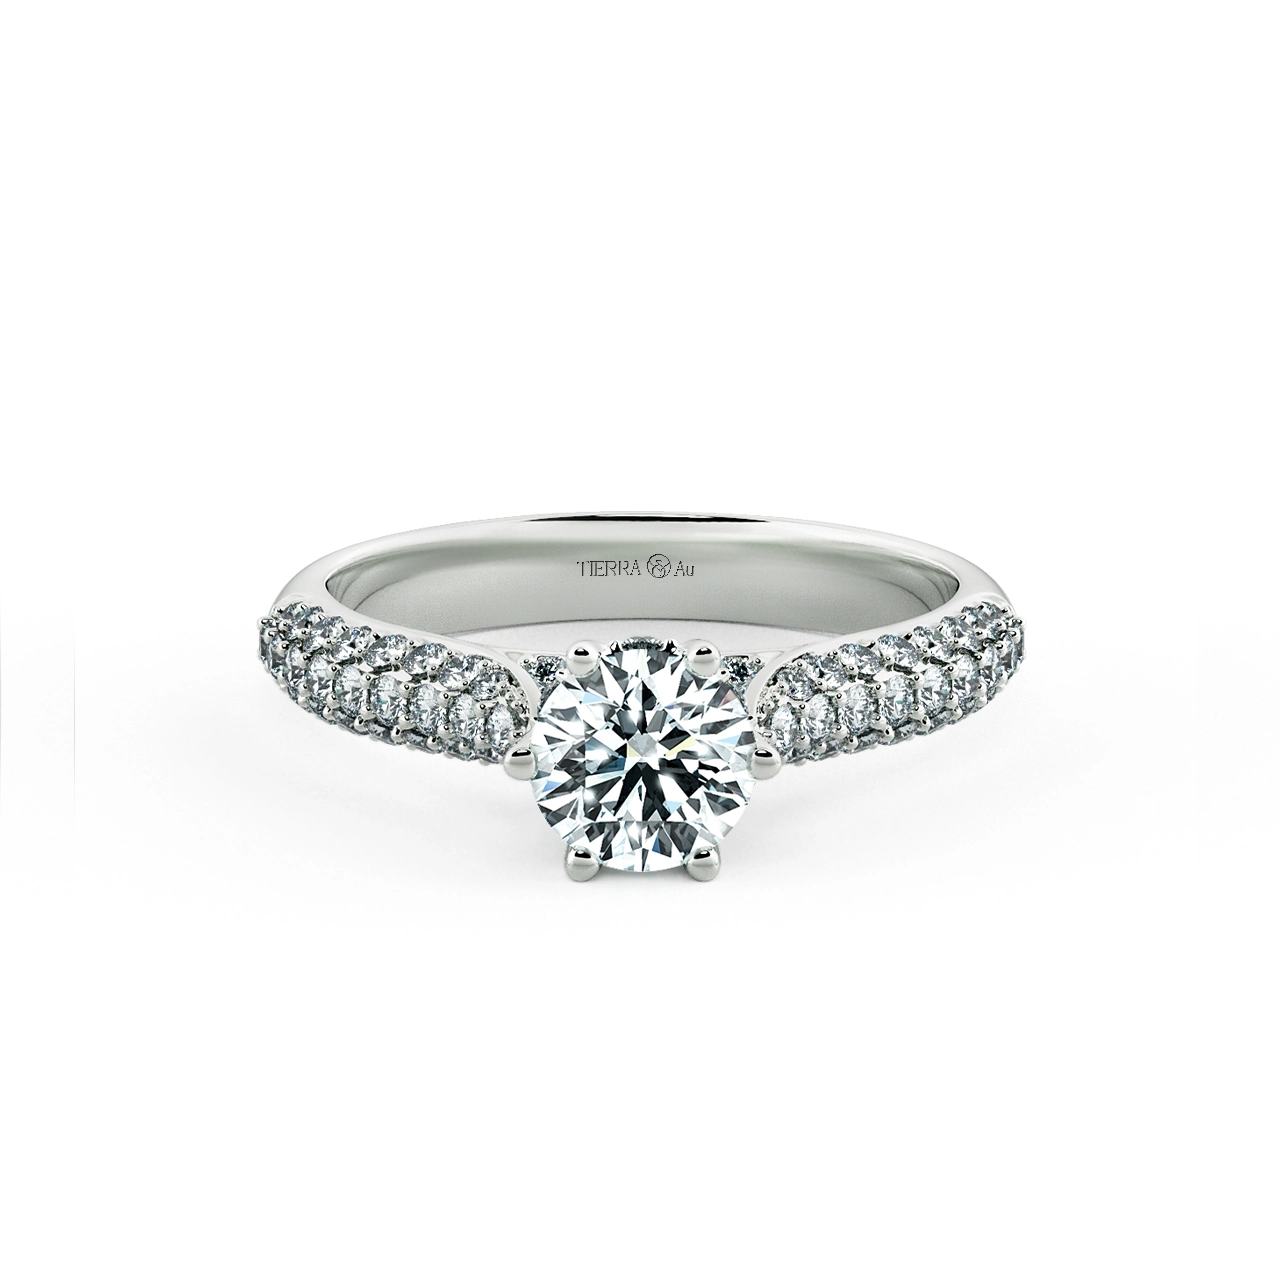 Cathedral Engagement Ring with Big Eternity Band NCH1507 1